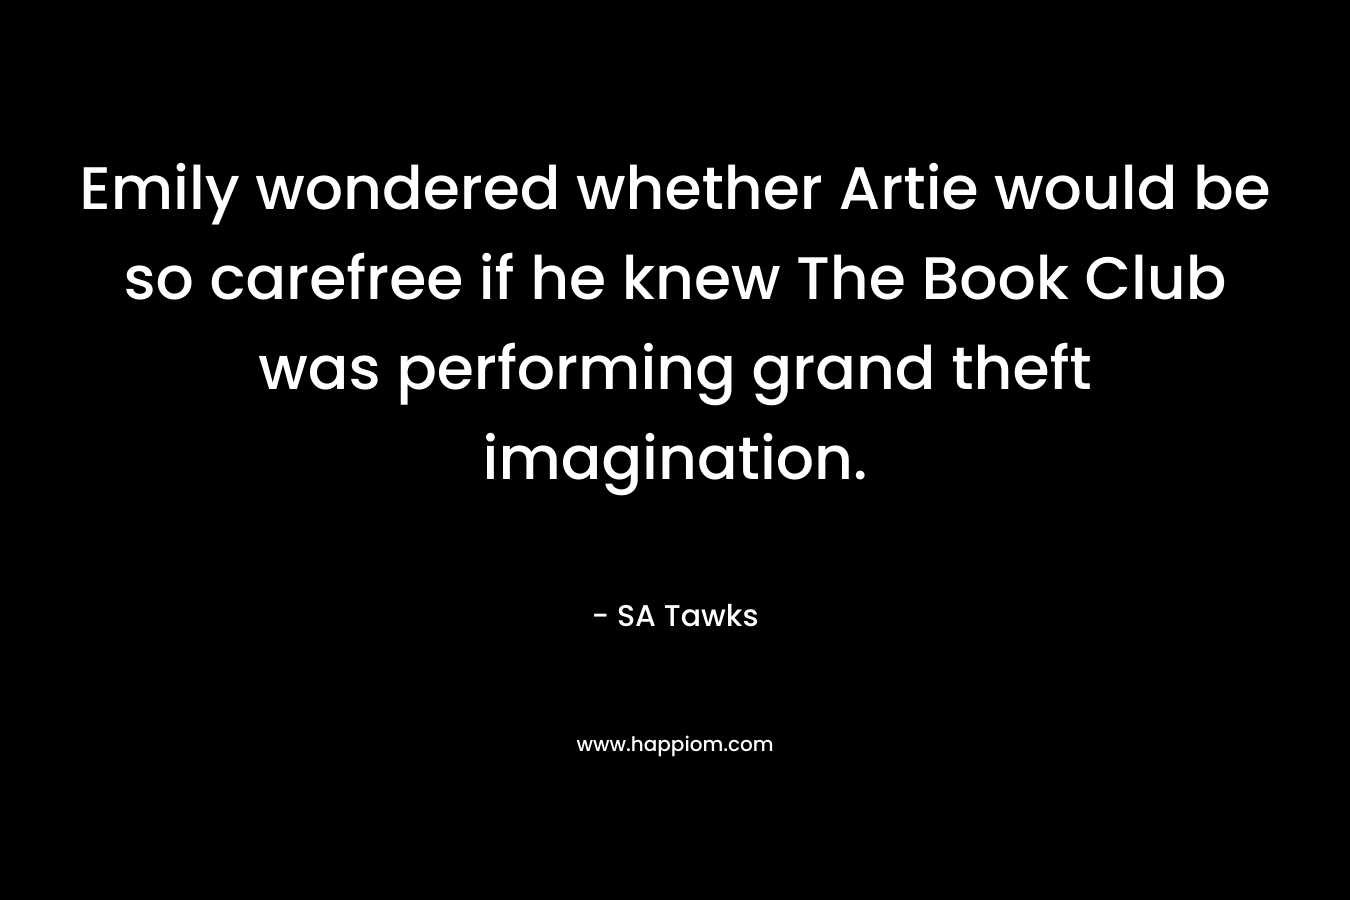 Emily wondered whether Artie would be so carefree if he knew The Book Club was performing grand theft imagination. – SA Tawks